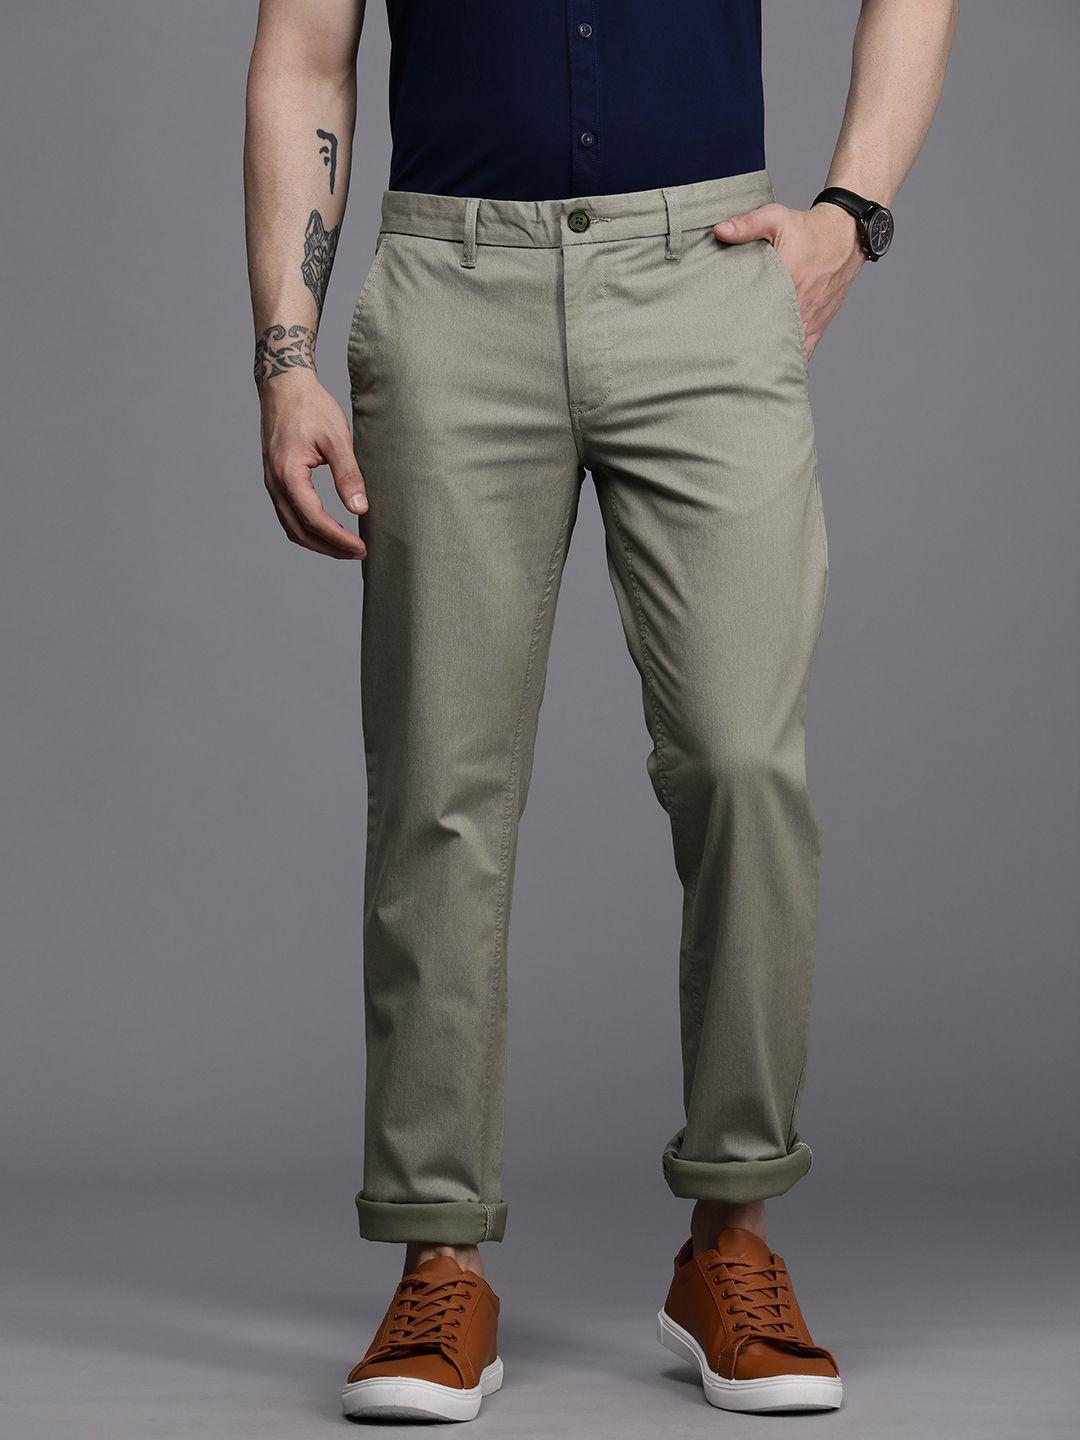 louis philippe sport men tapered fit flat front casual trousers